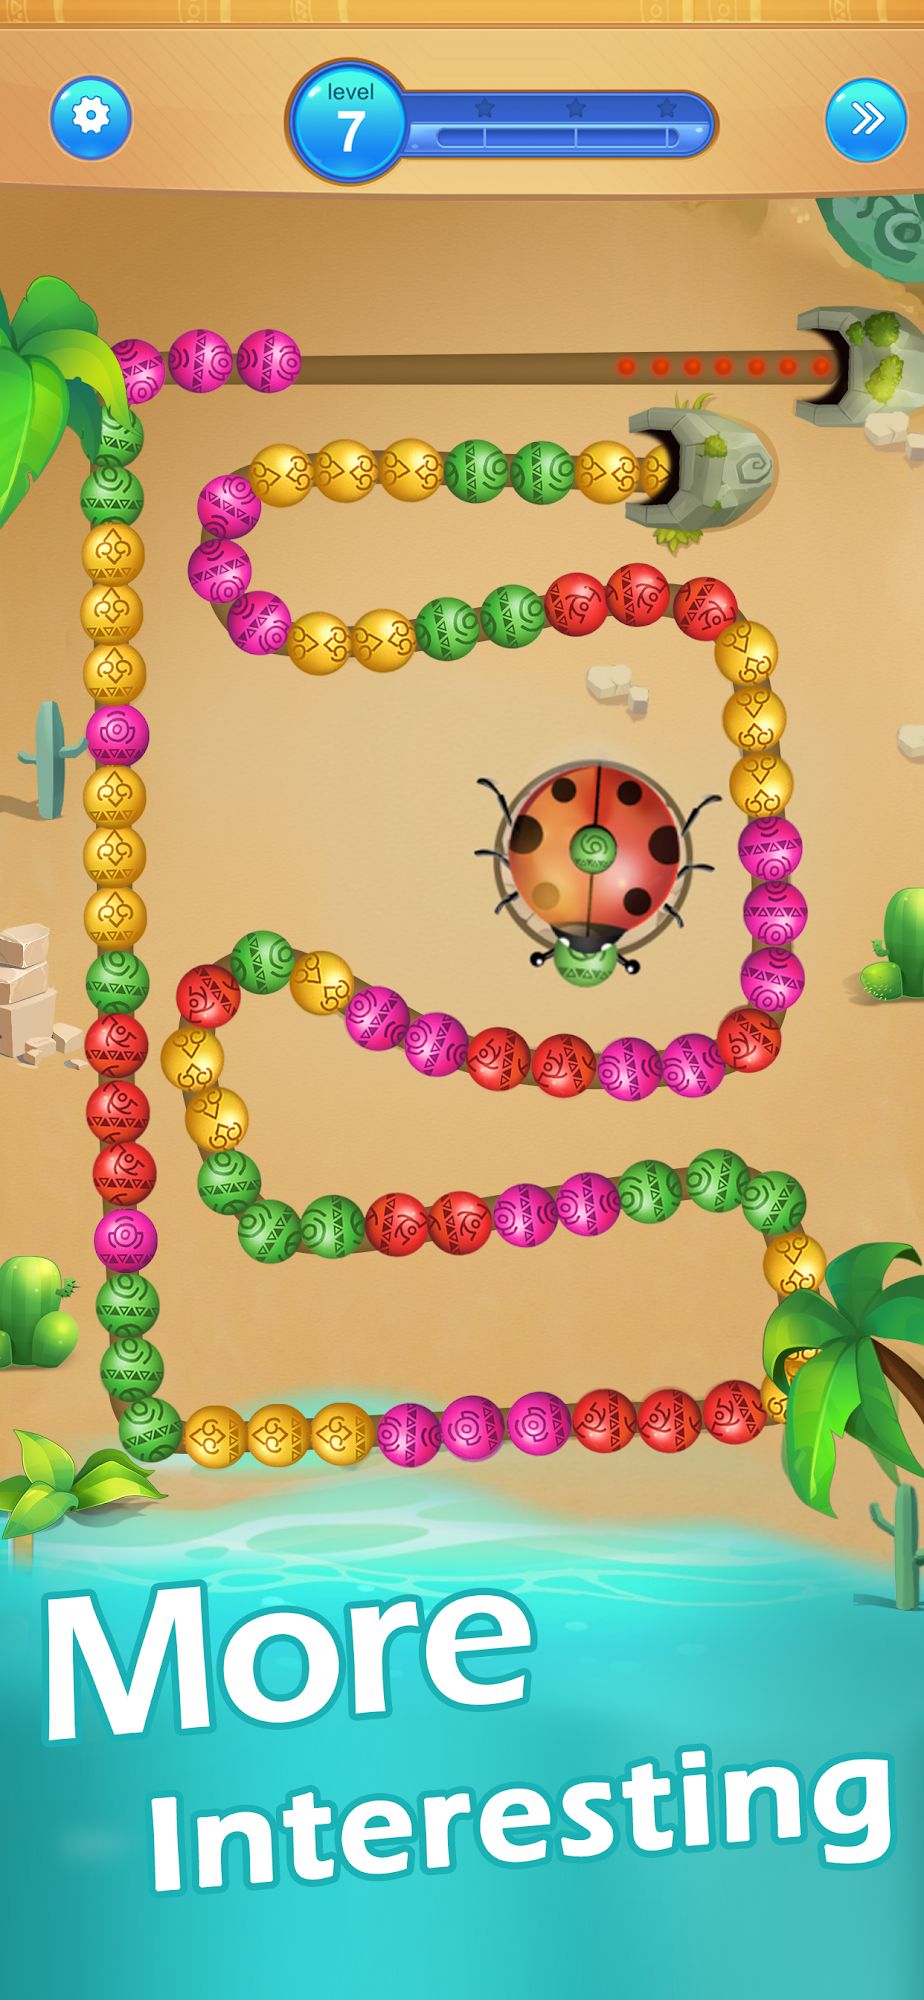 Marble Shooter:Ball Blast Games for Android